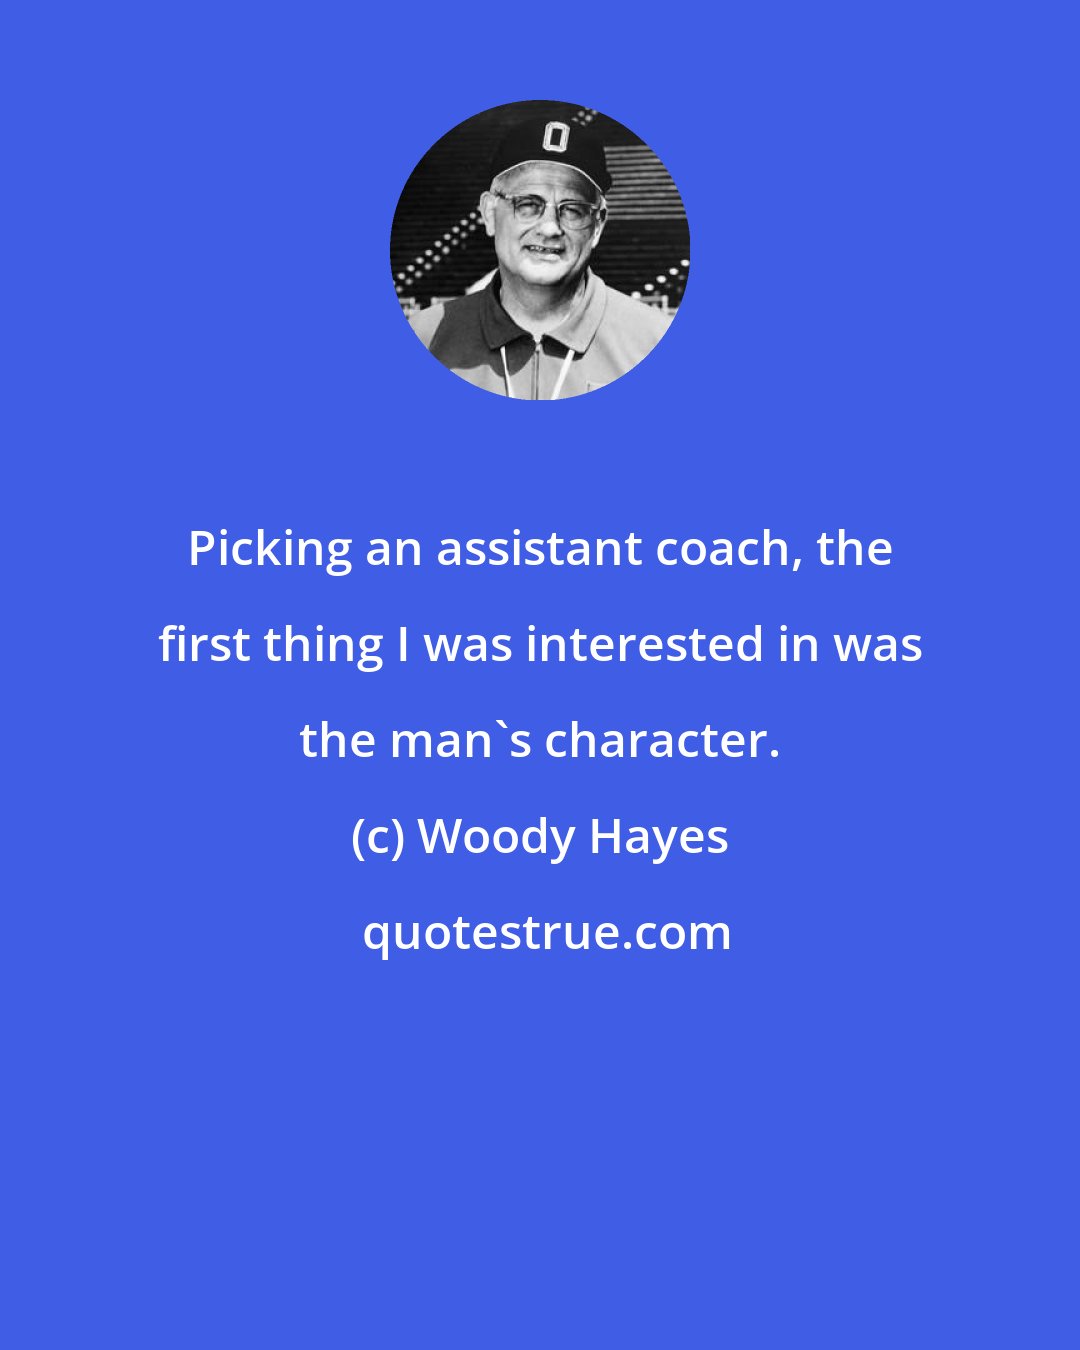 Woody Hayes: Picking an assistant coach, the first thing I was interested in was the man's character.